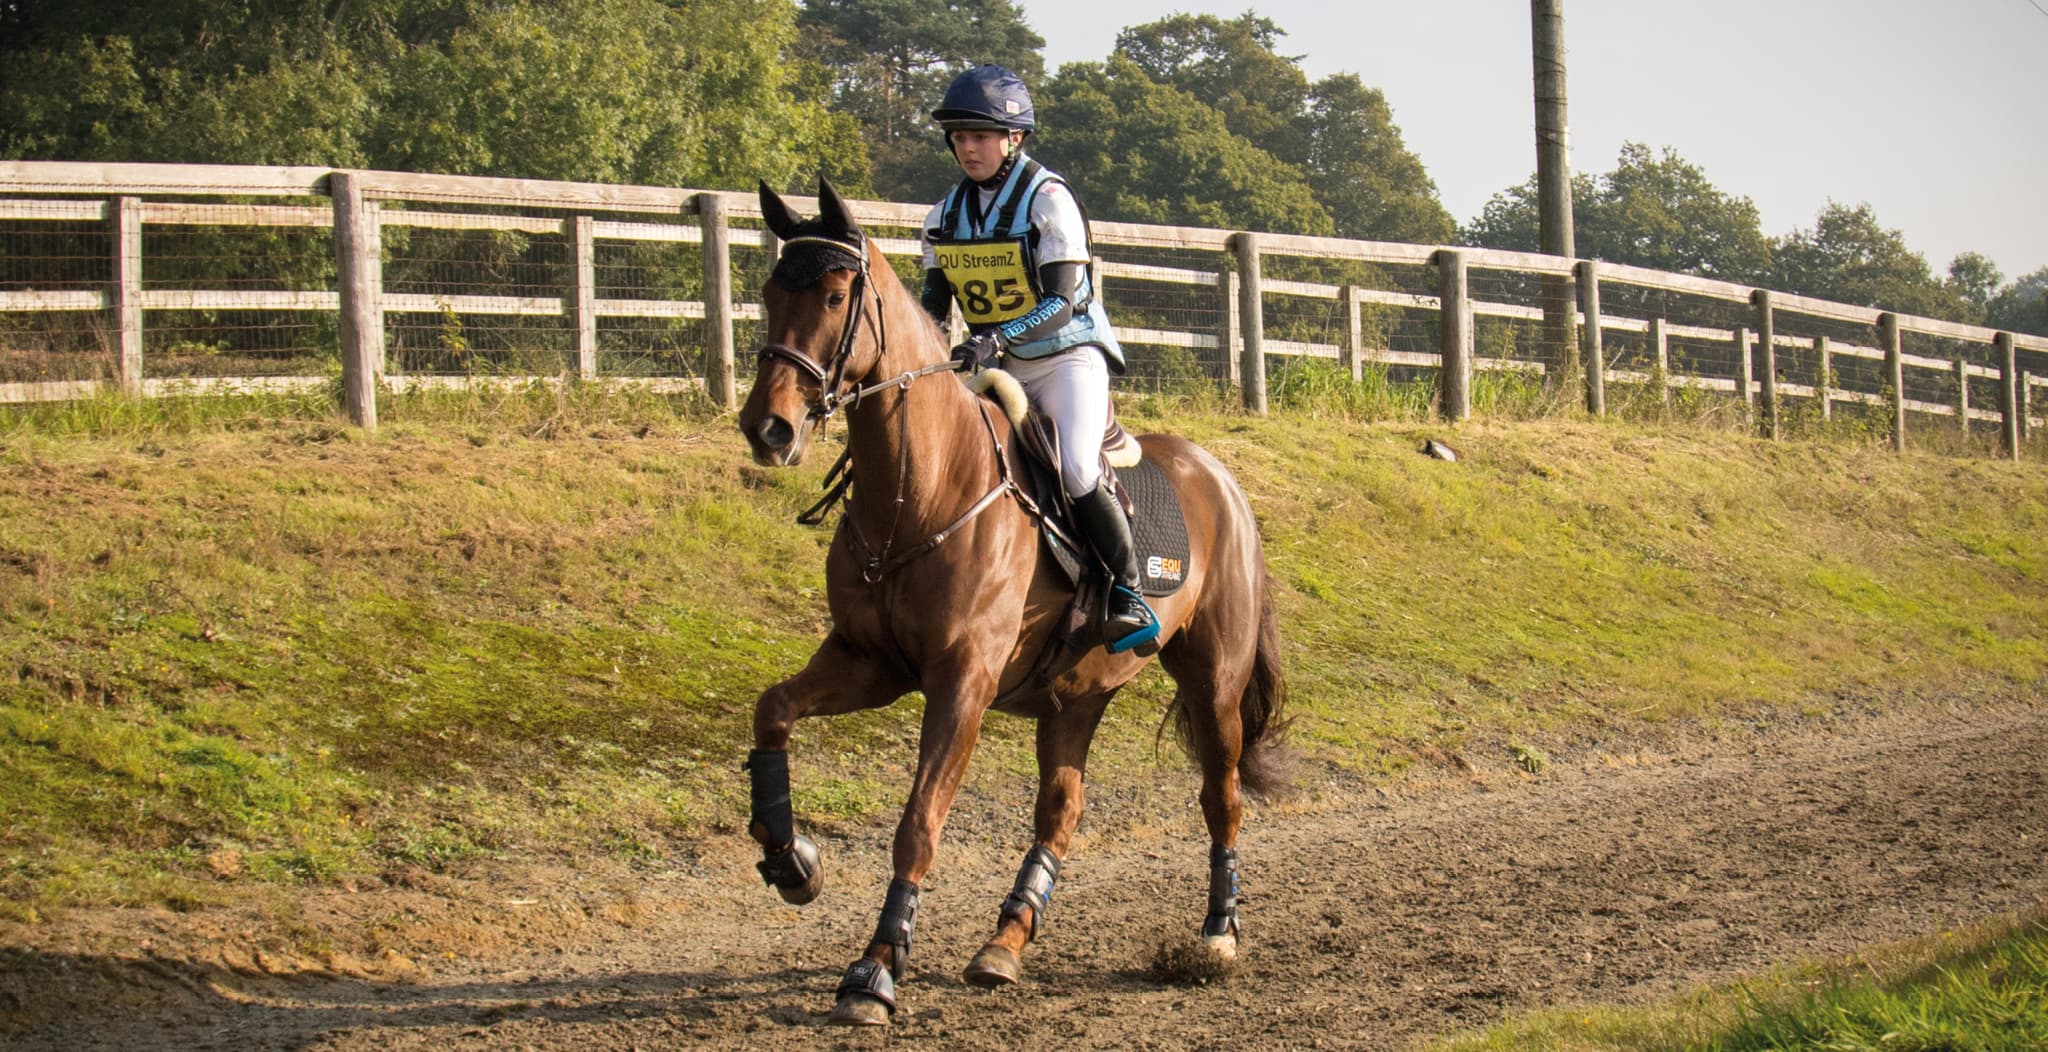 EQU Streamz advanced magnetic horse bands sponsored by Harriet Upton for Team GB 3-day eventing international. Endorses EQU bands for use both pre and post exercise on her horses owned by Queen Elizabeth II. 